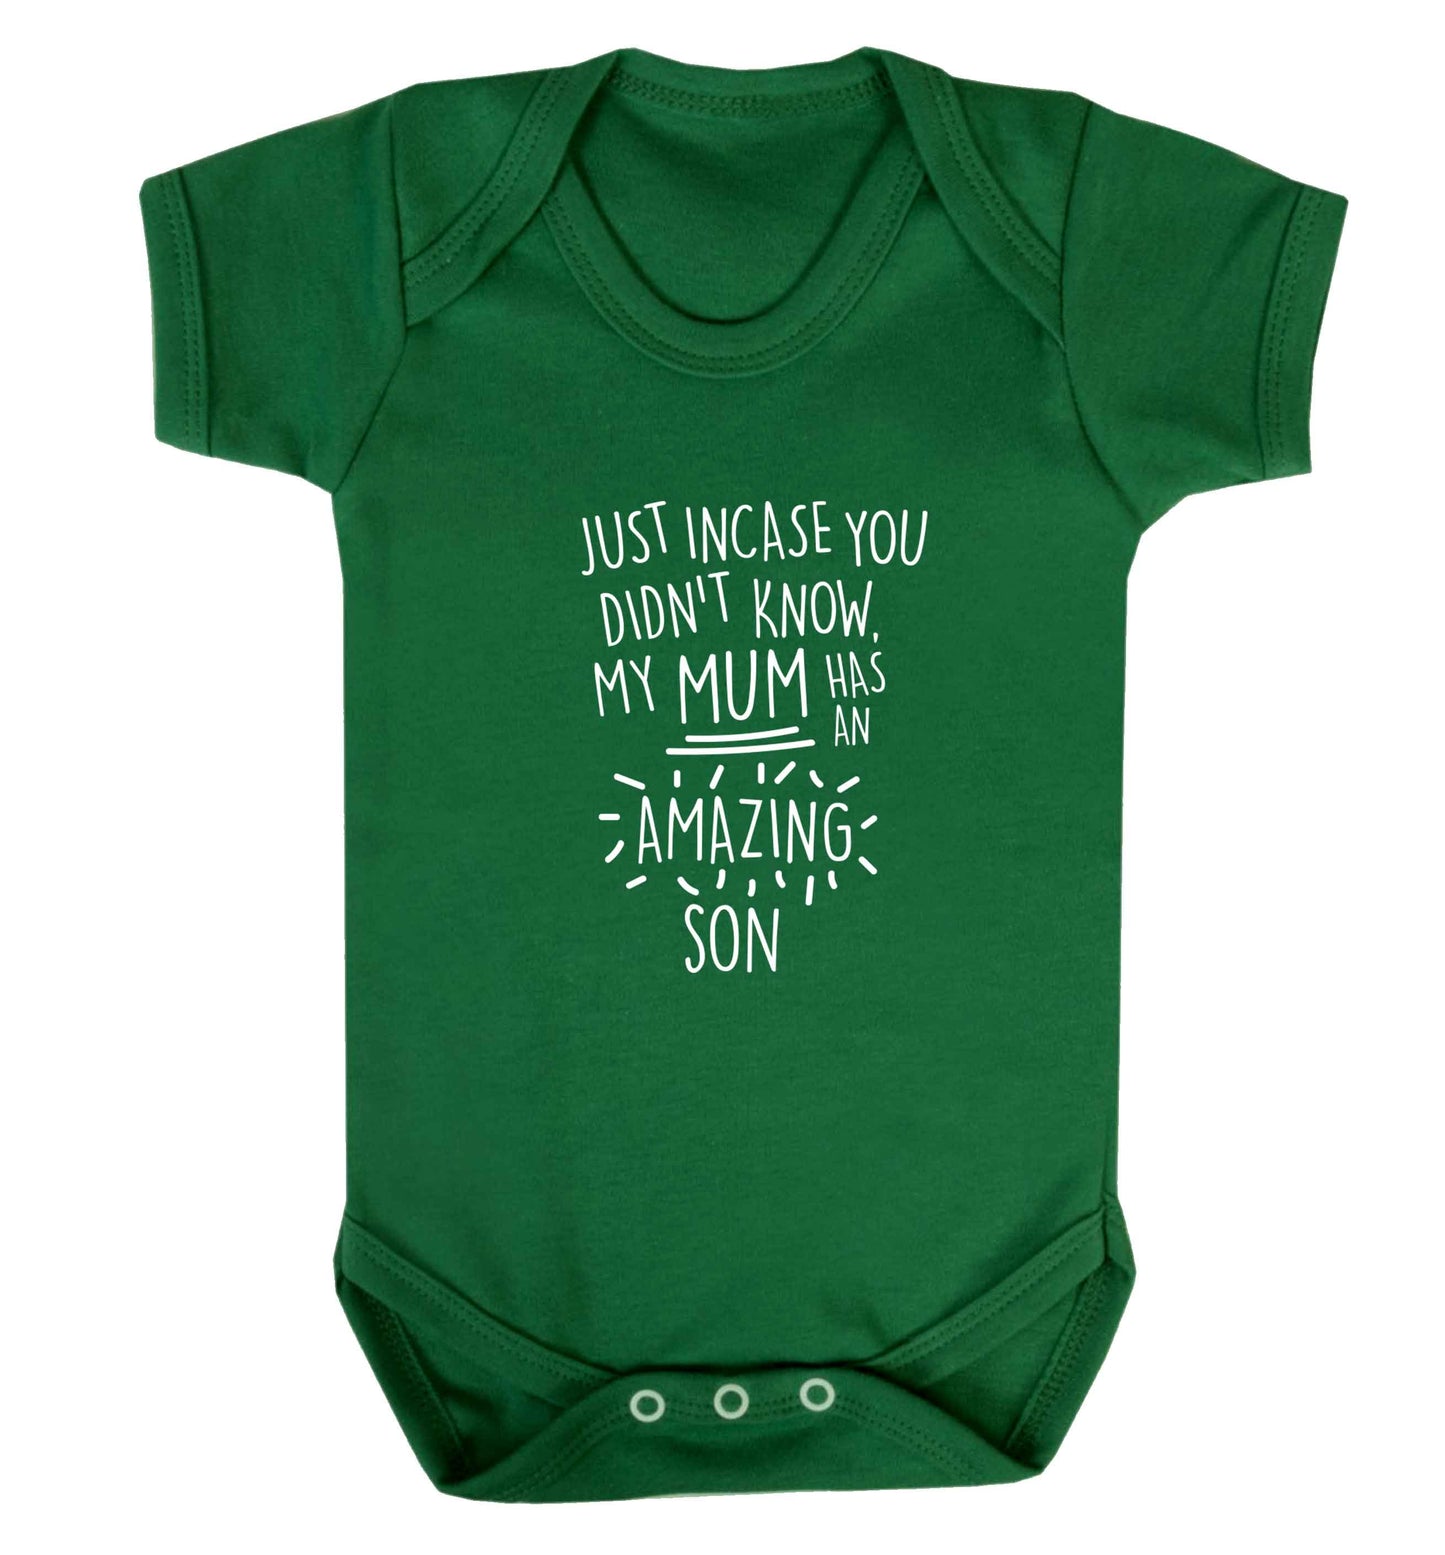 Just incase you didn't know my mum has an amazing son baby vest green 18-24 months